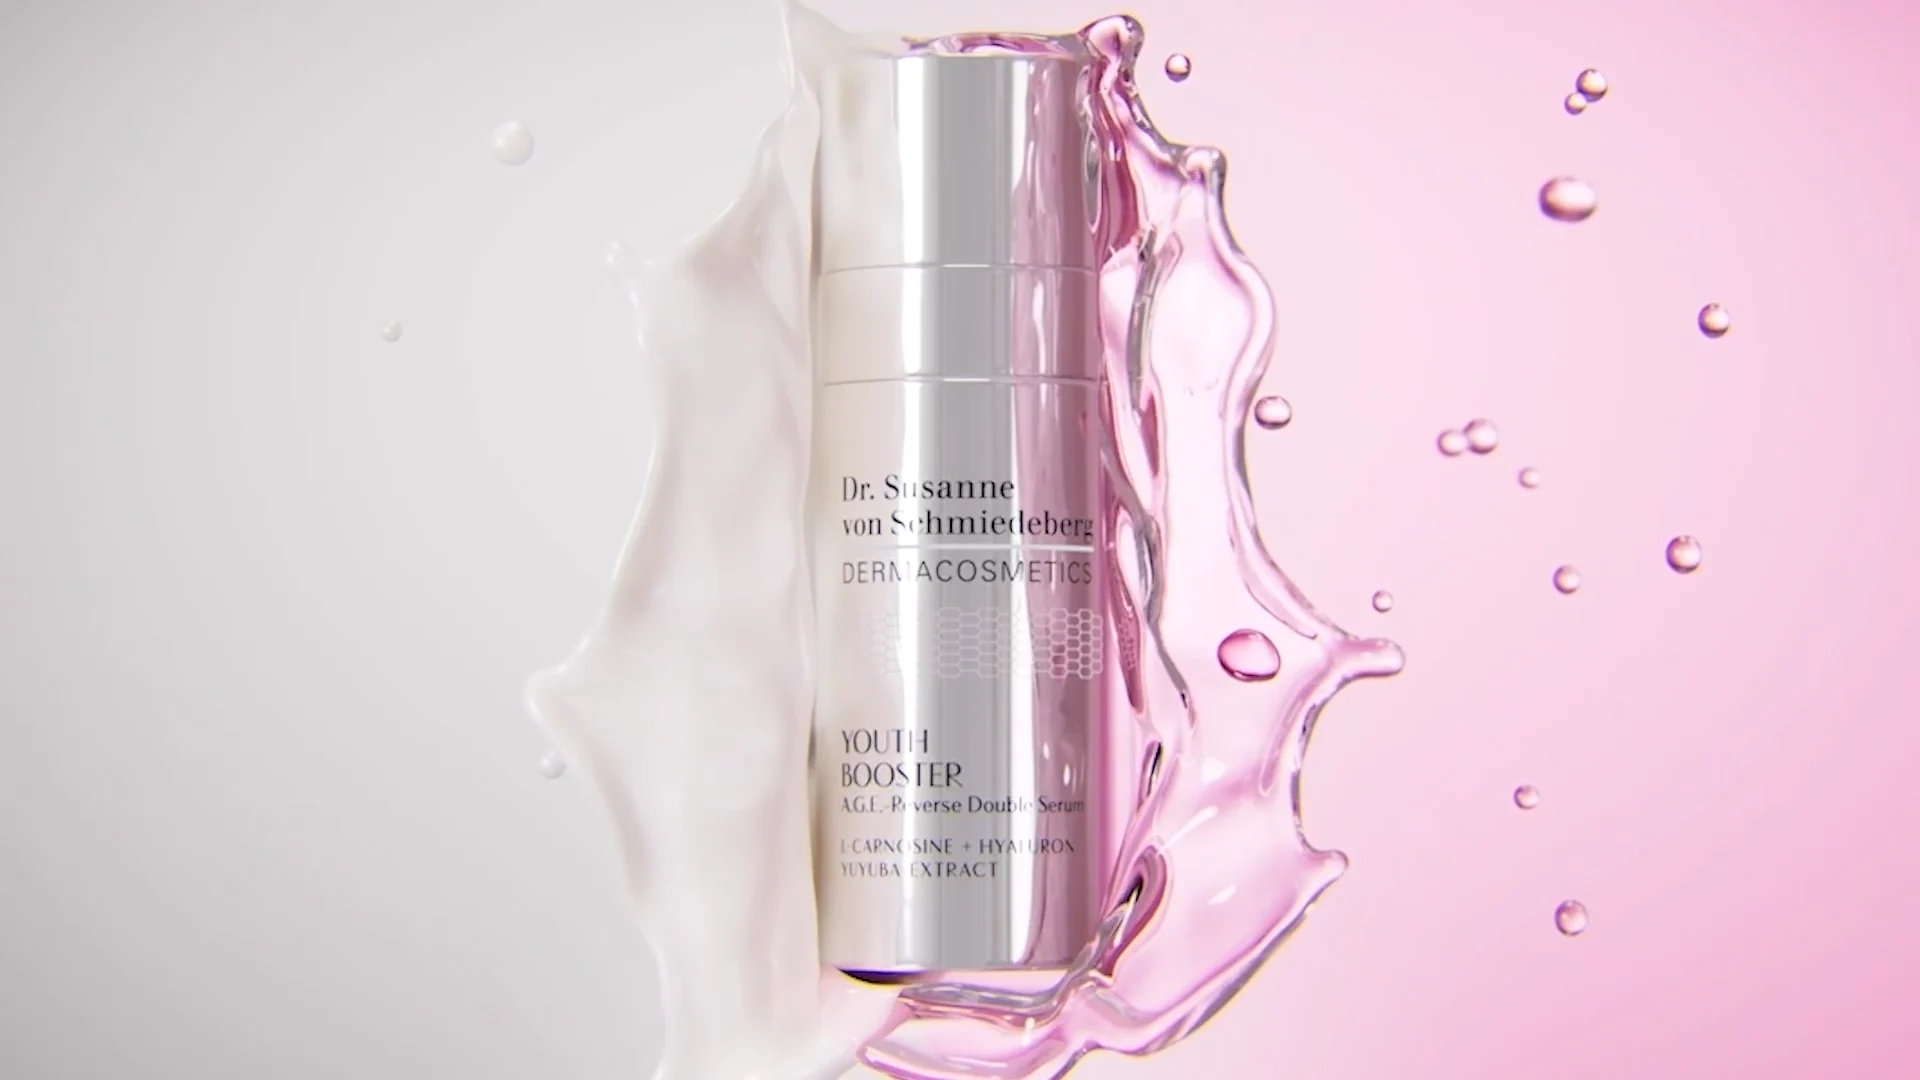 a silver derma cosmetic youth booster serum botte coming out of two liquids which are split in the middle. on the right side there is a transparent magenta liquid and on the left side a milky white liquid